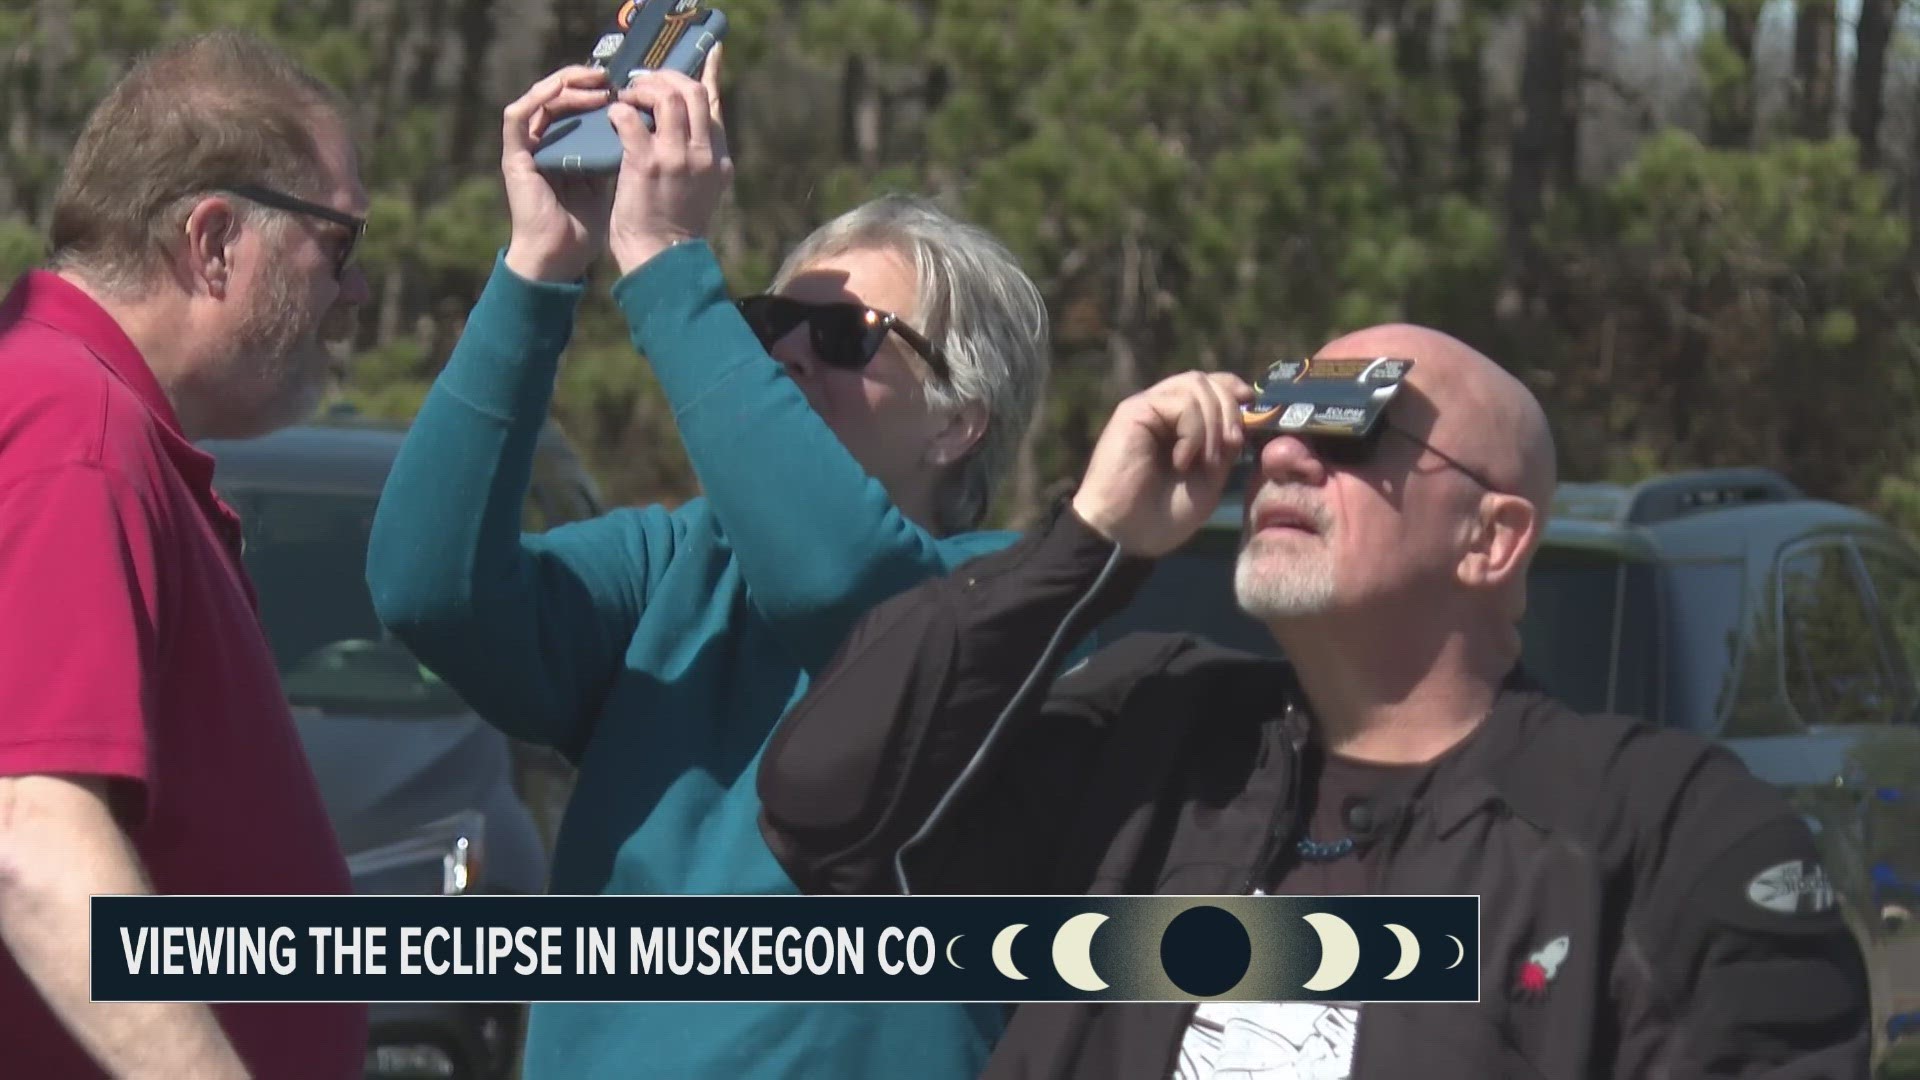 People went out to the Muskegon Astronomical Society's "Star Party" to get a view of the solar eclipse.